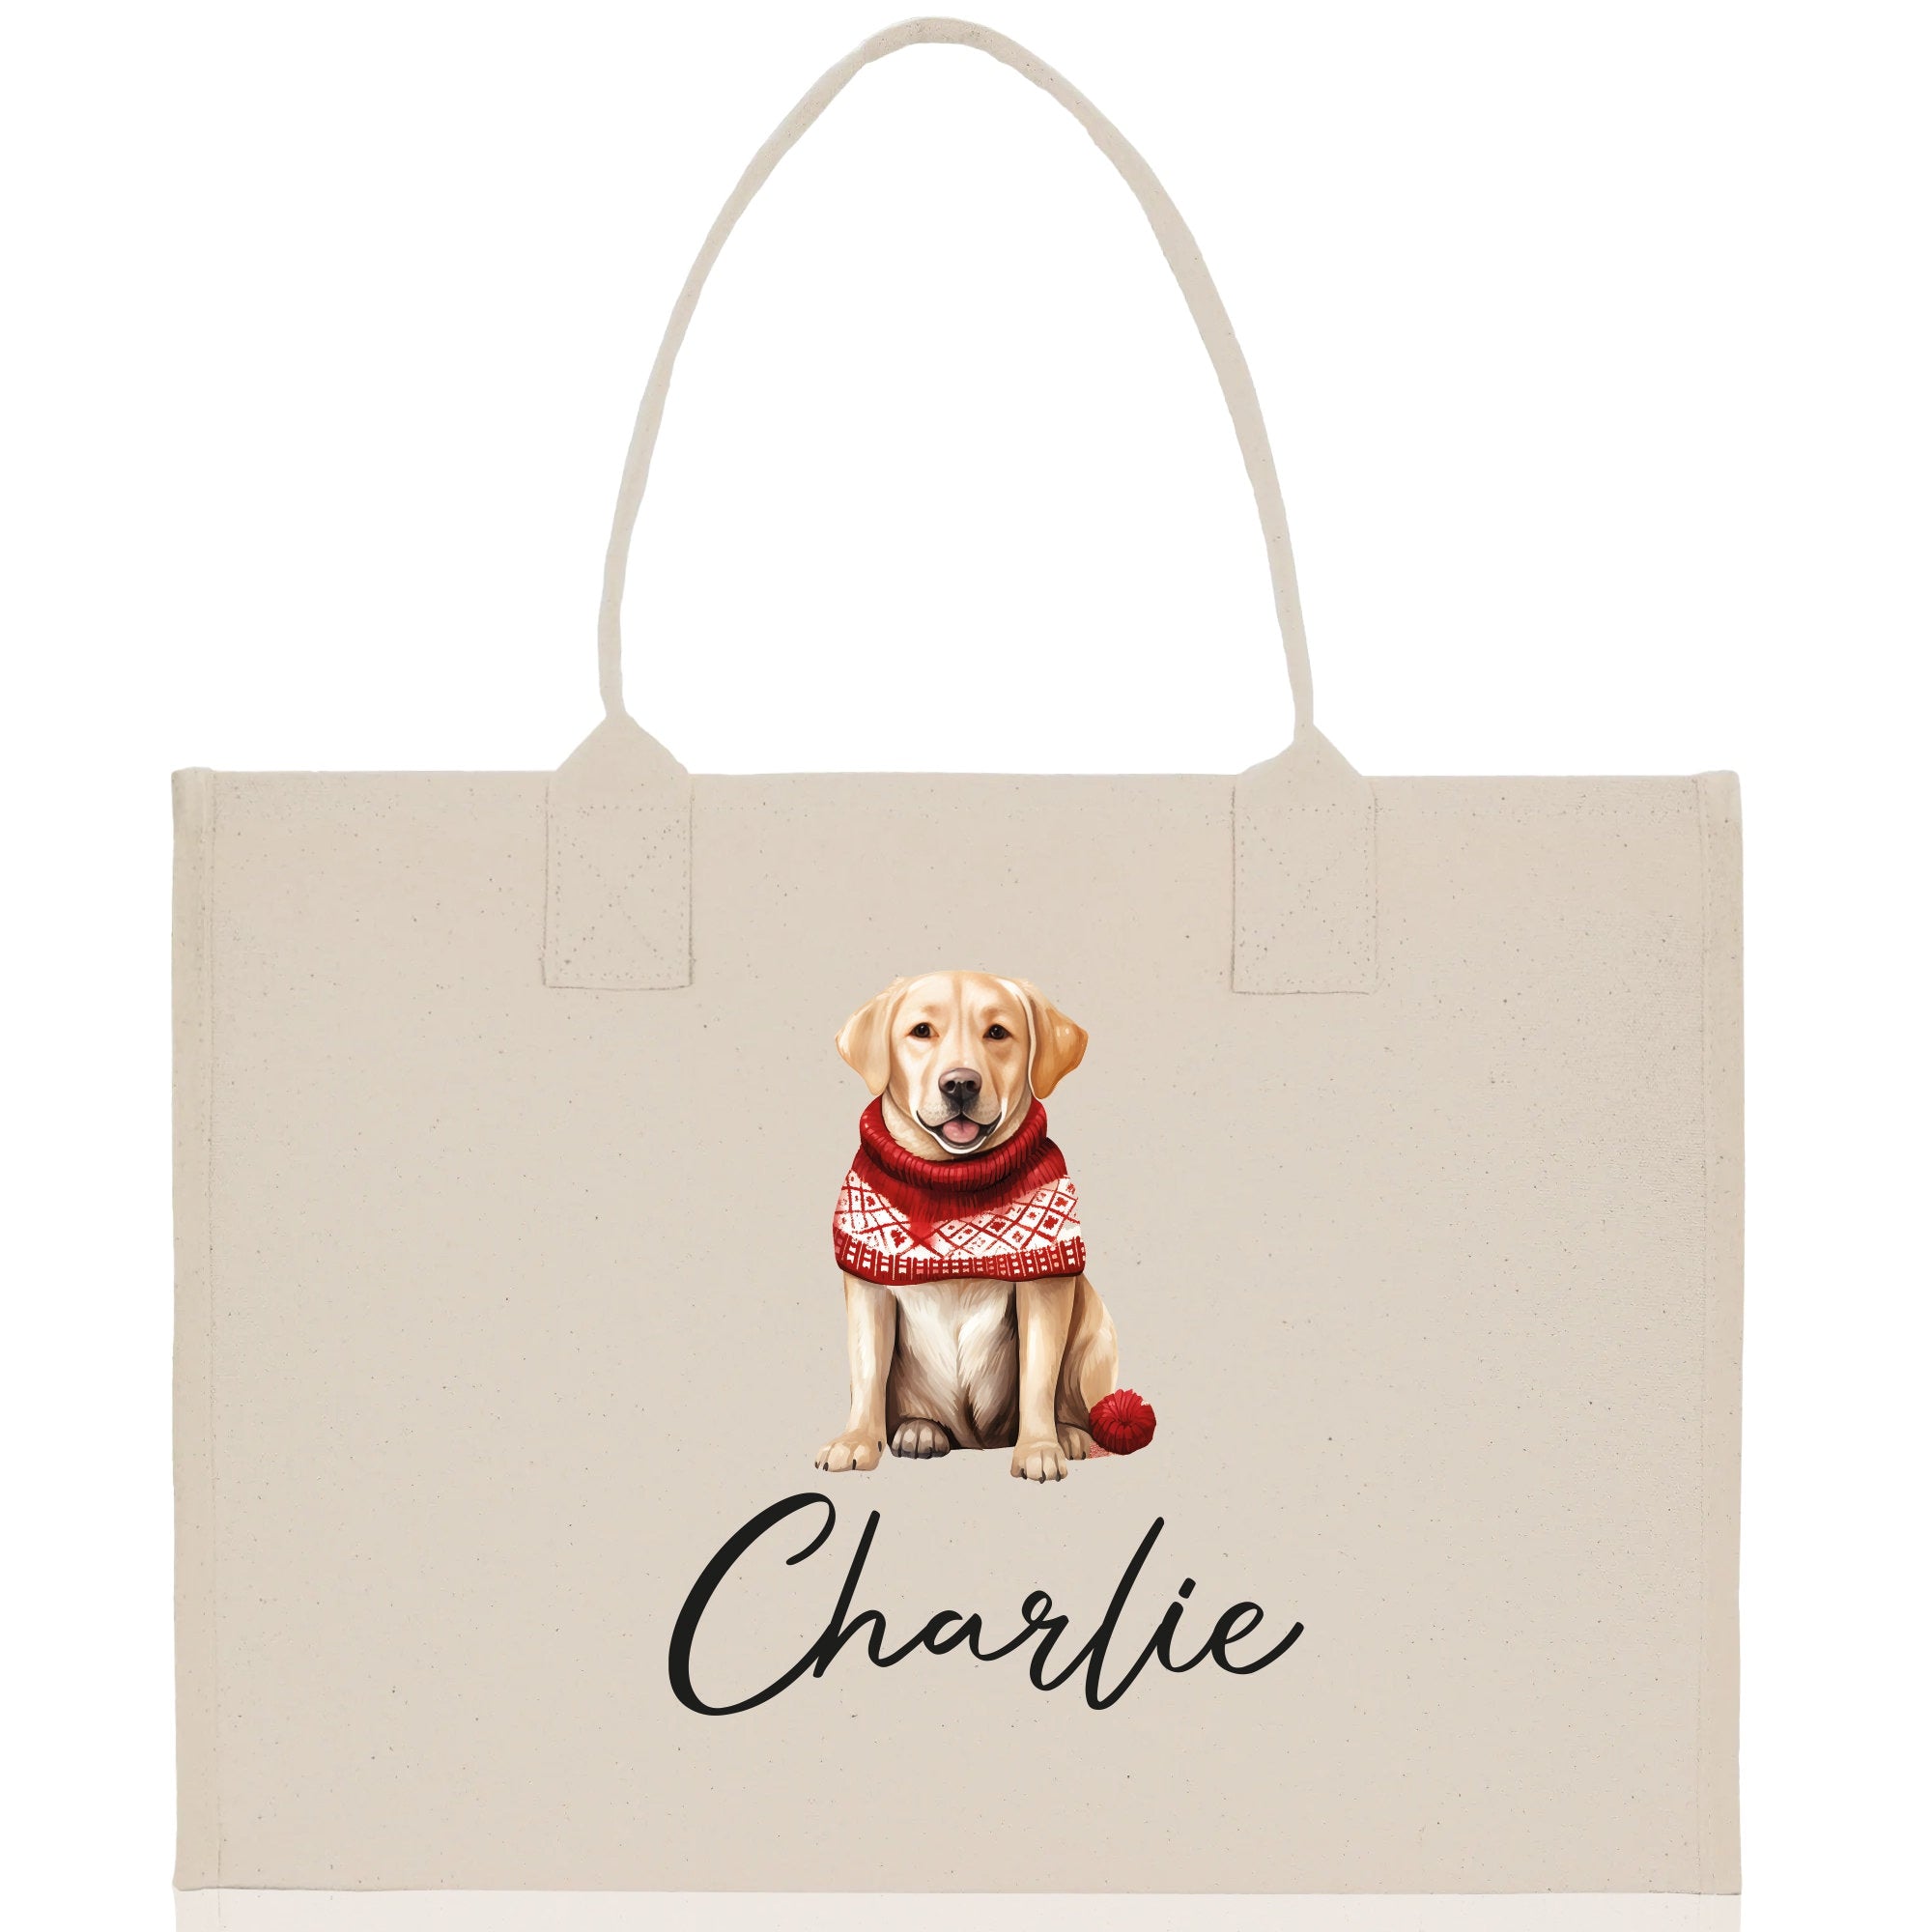 a bag with a dog wearing a scarf